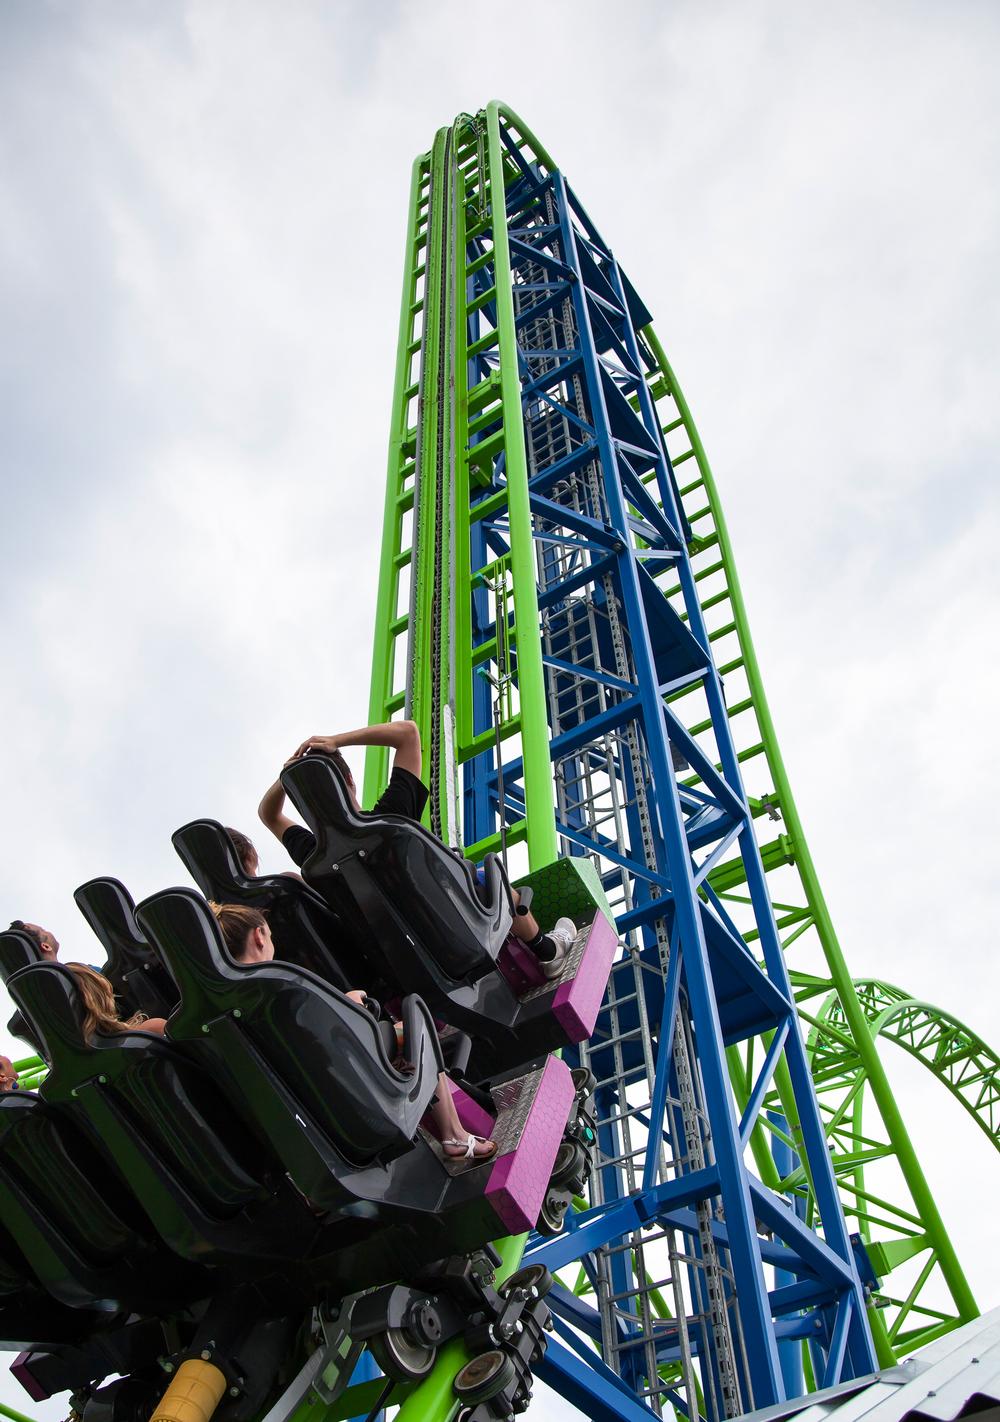 When reaching the top of a coaster, proprioception kicks in, which is like an inner sense of touch